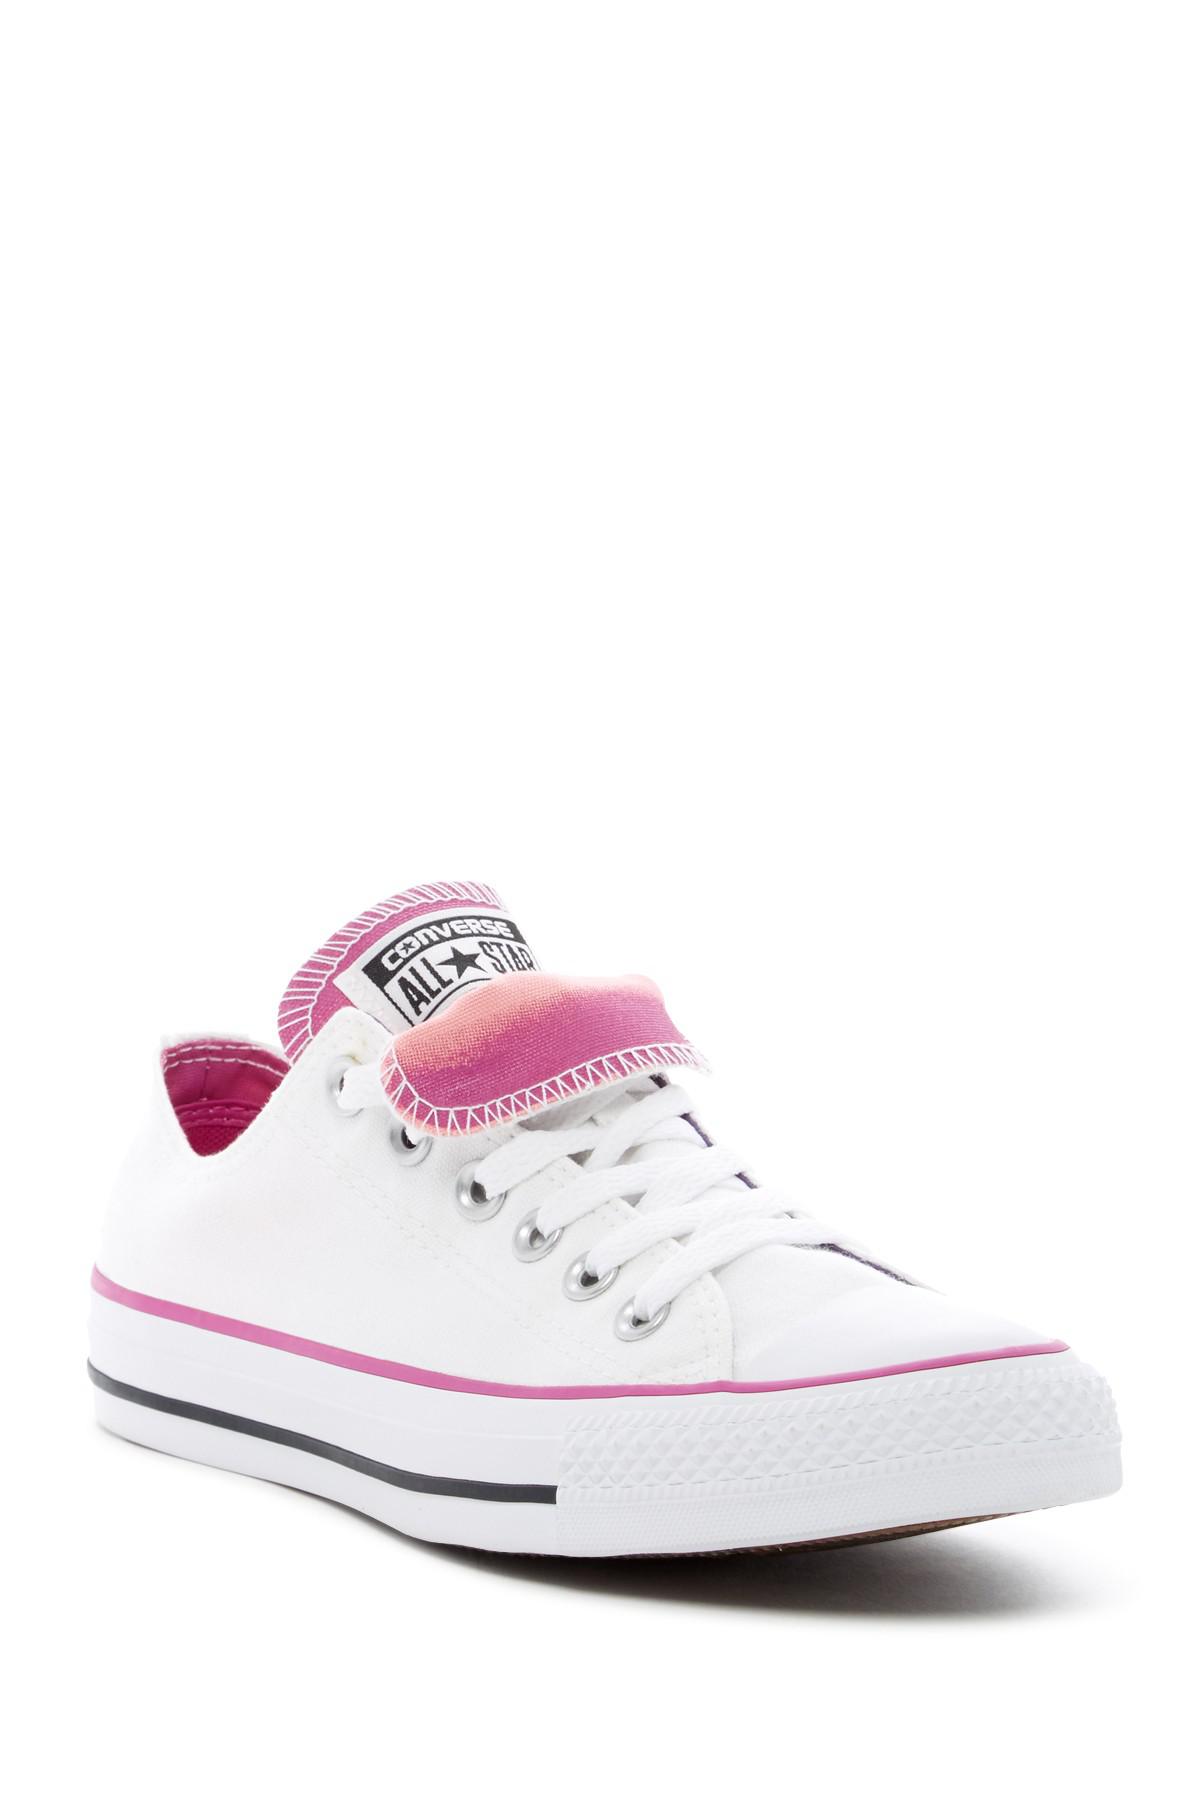 Converse Chuck Taylor All Star Double Tongue Oxford Sneakers (women) in  White-Pink-Pink (Pink) | Lyst